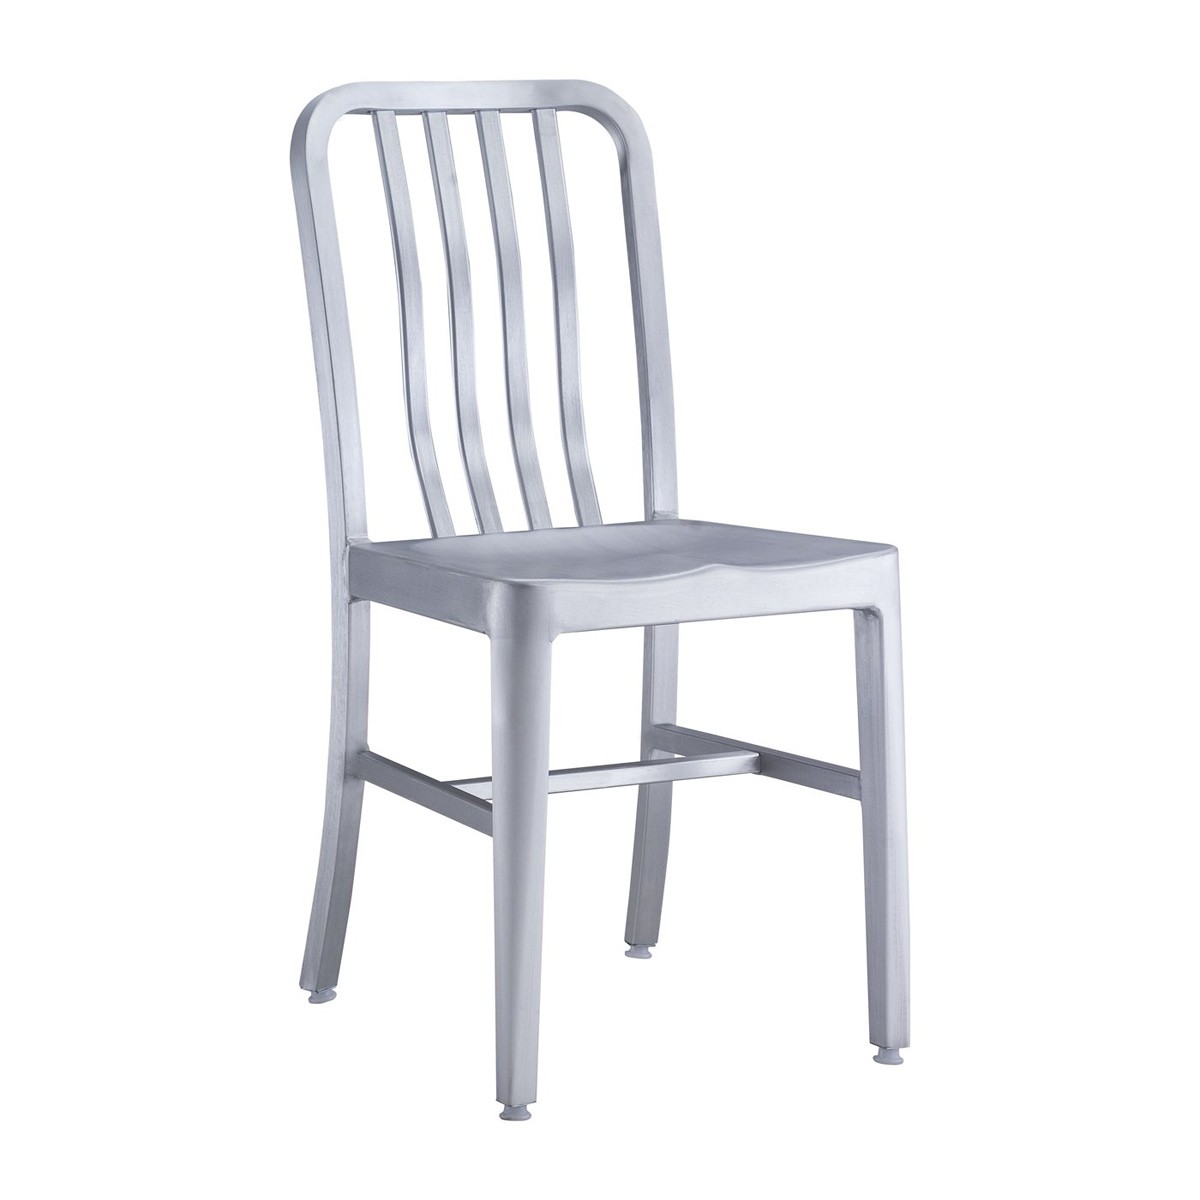 Zuo Modern Gastro Dining Chair - Brushed Aluminum